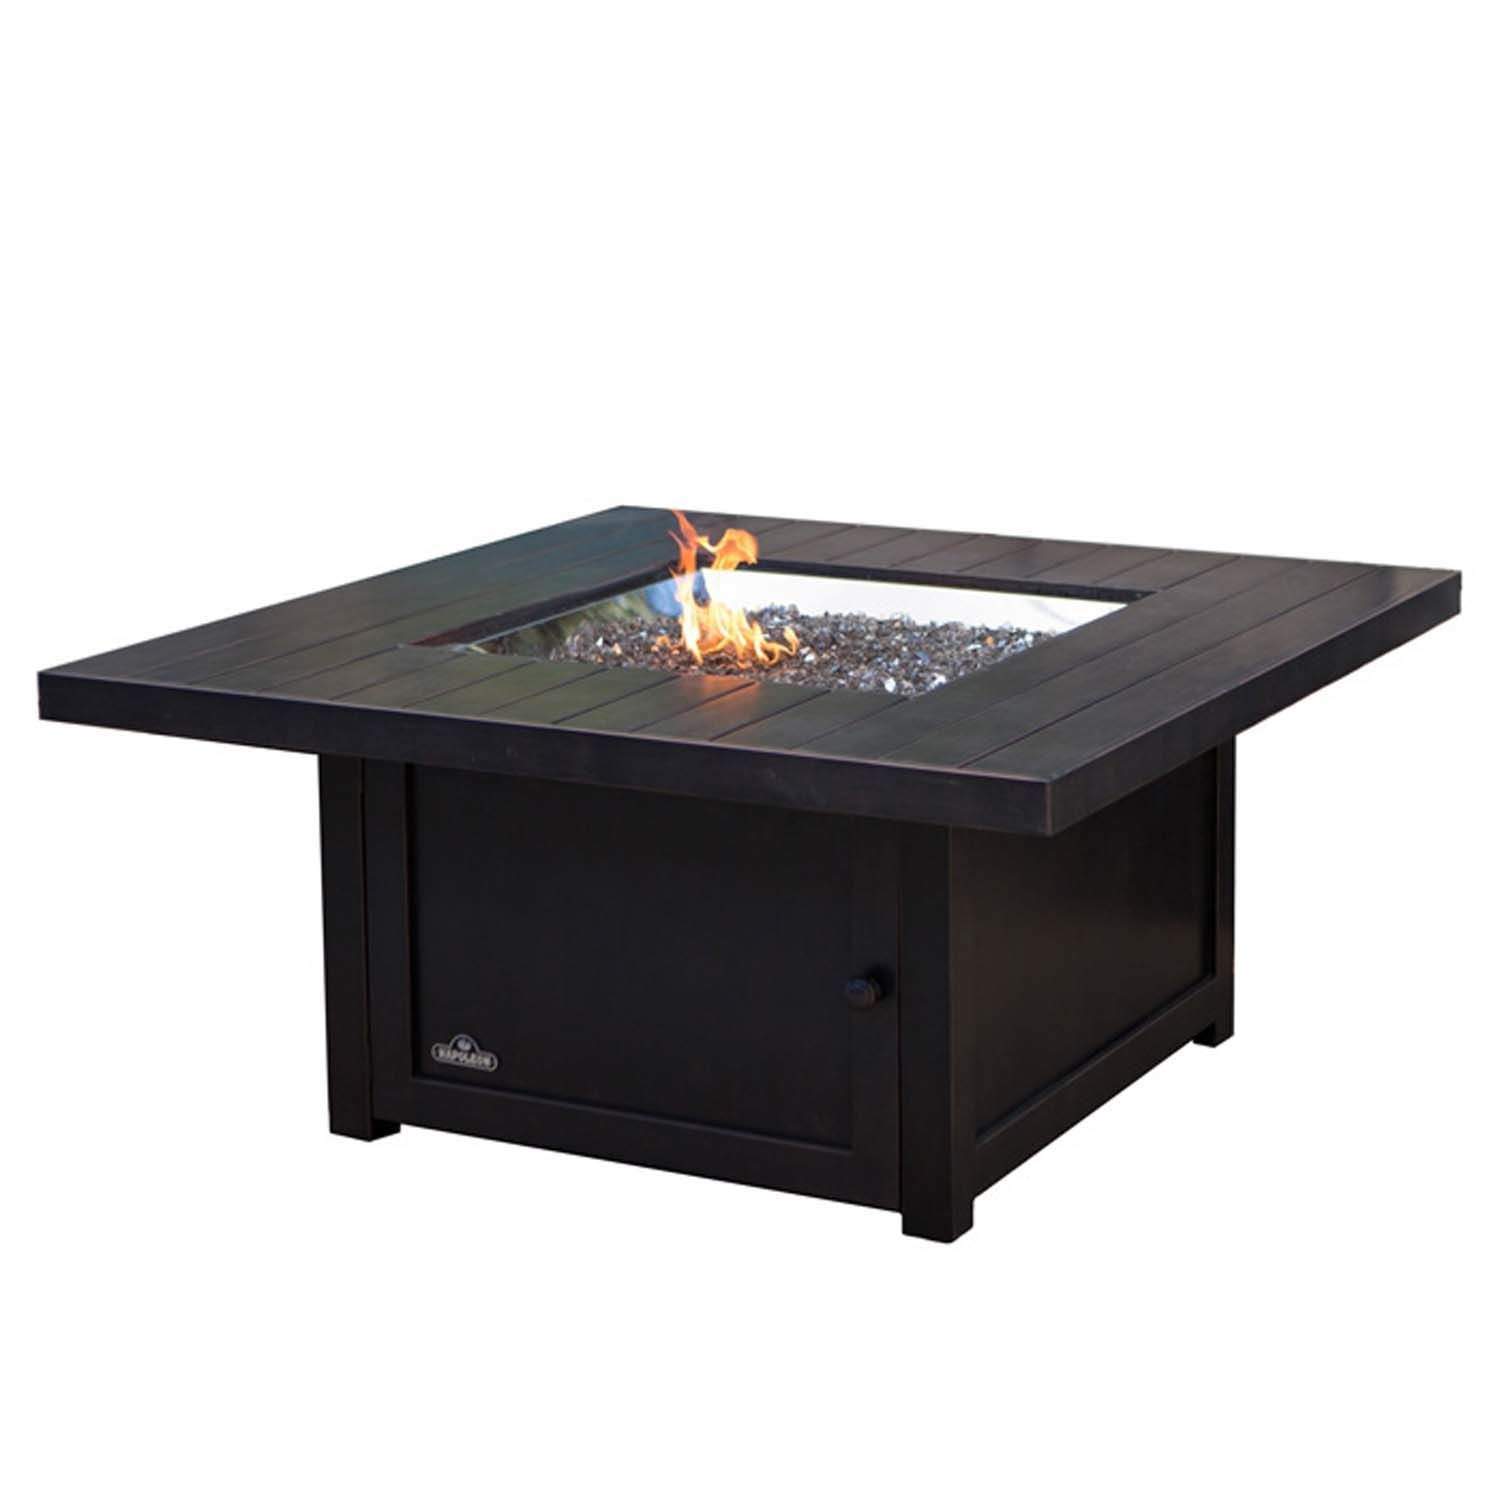 Outdoor Fire Pit, Pros And Cons Of Propane Fire Pits